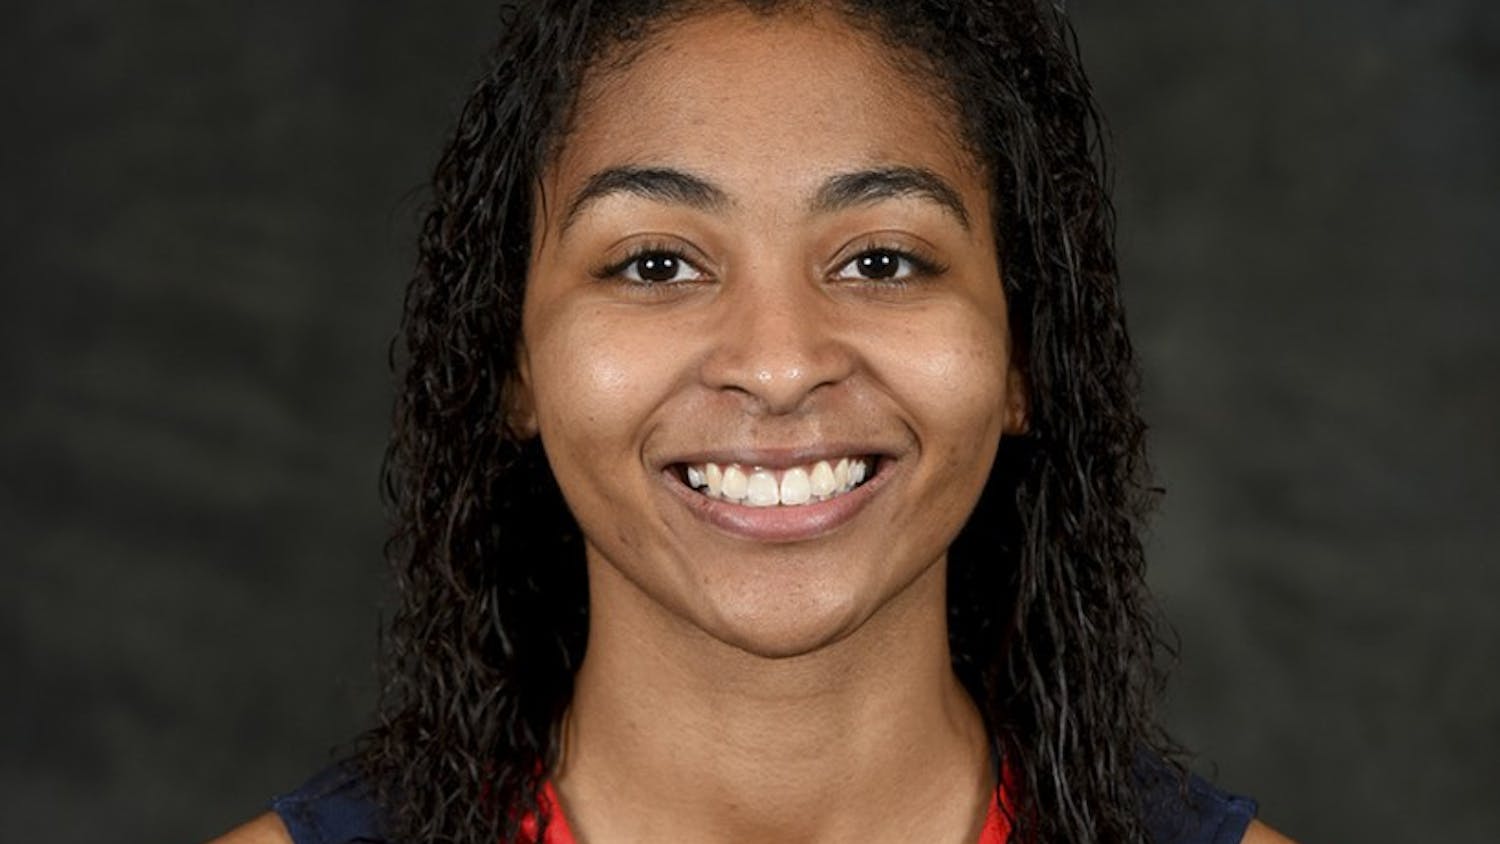 Amber Deane transfers to play for the IU women's basketball team after graduating from Dayton. 